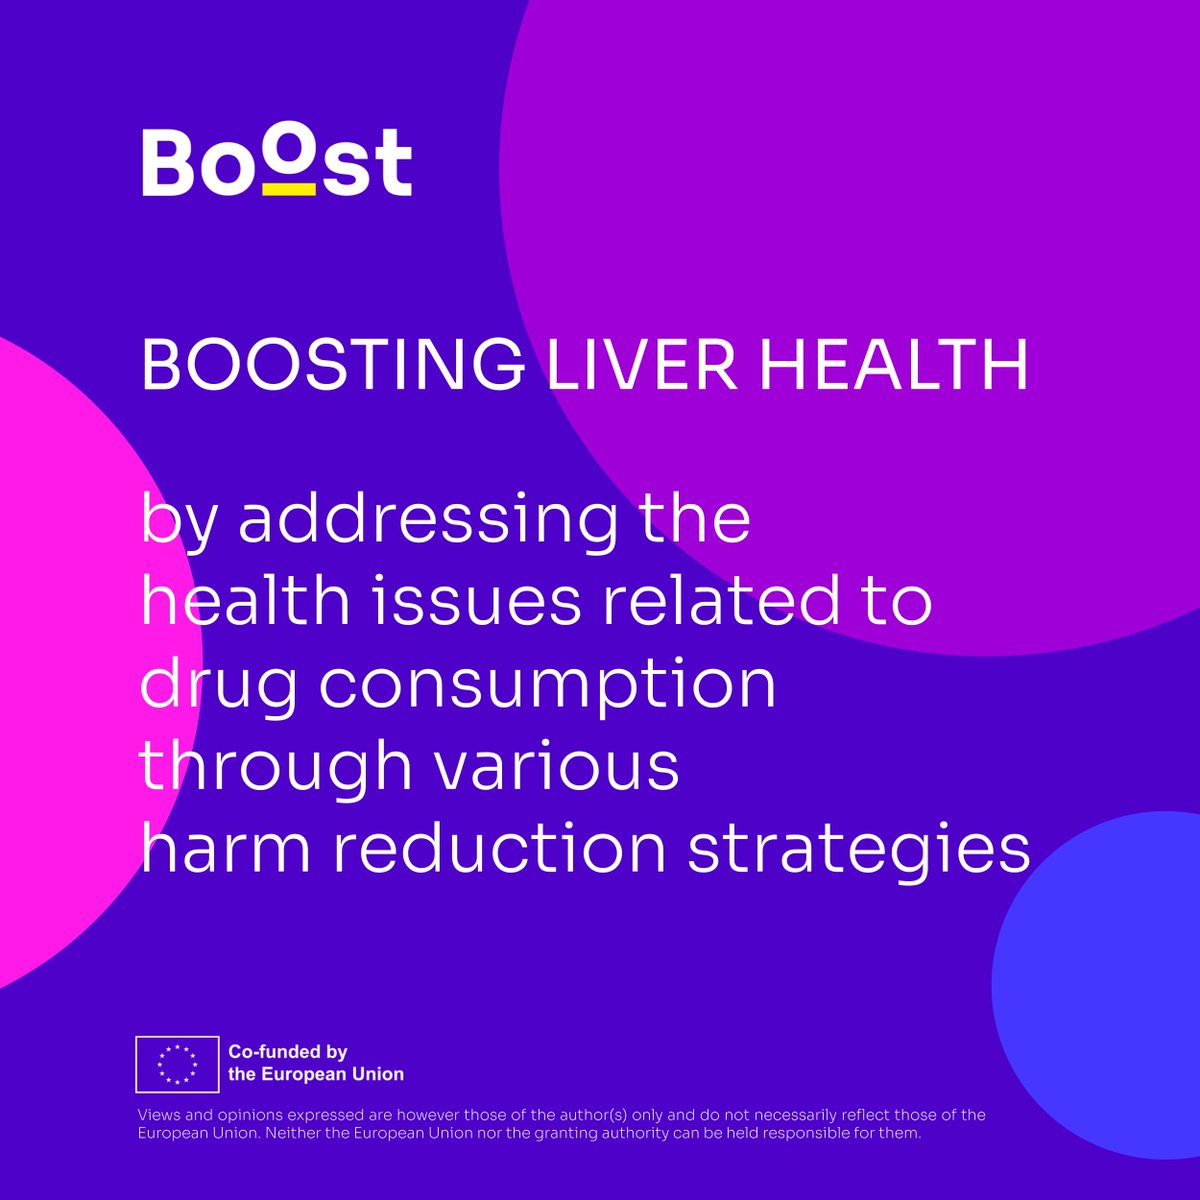 Find out how the #EU4HBOOST project contributes to improving liver health! Read the blog post: buff.ly/3Ju64gu 

@EHRA2017 @DPN_SEE @Podane_ruce @VillaMaraini @aklinikka @ISGLOBALorg  @LILAMilano @abd_ong @GTRecerca @euronpud

#WorldLiverDay